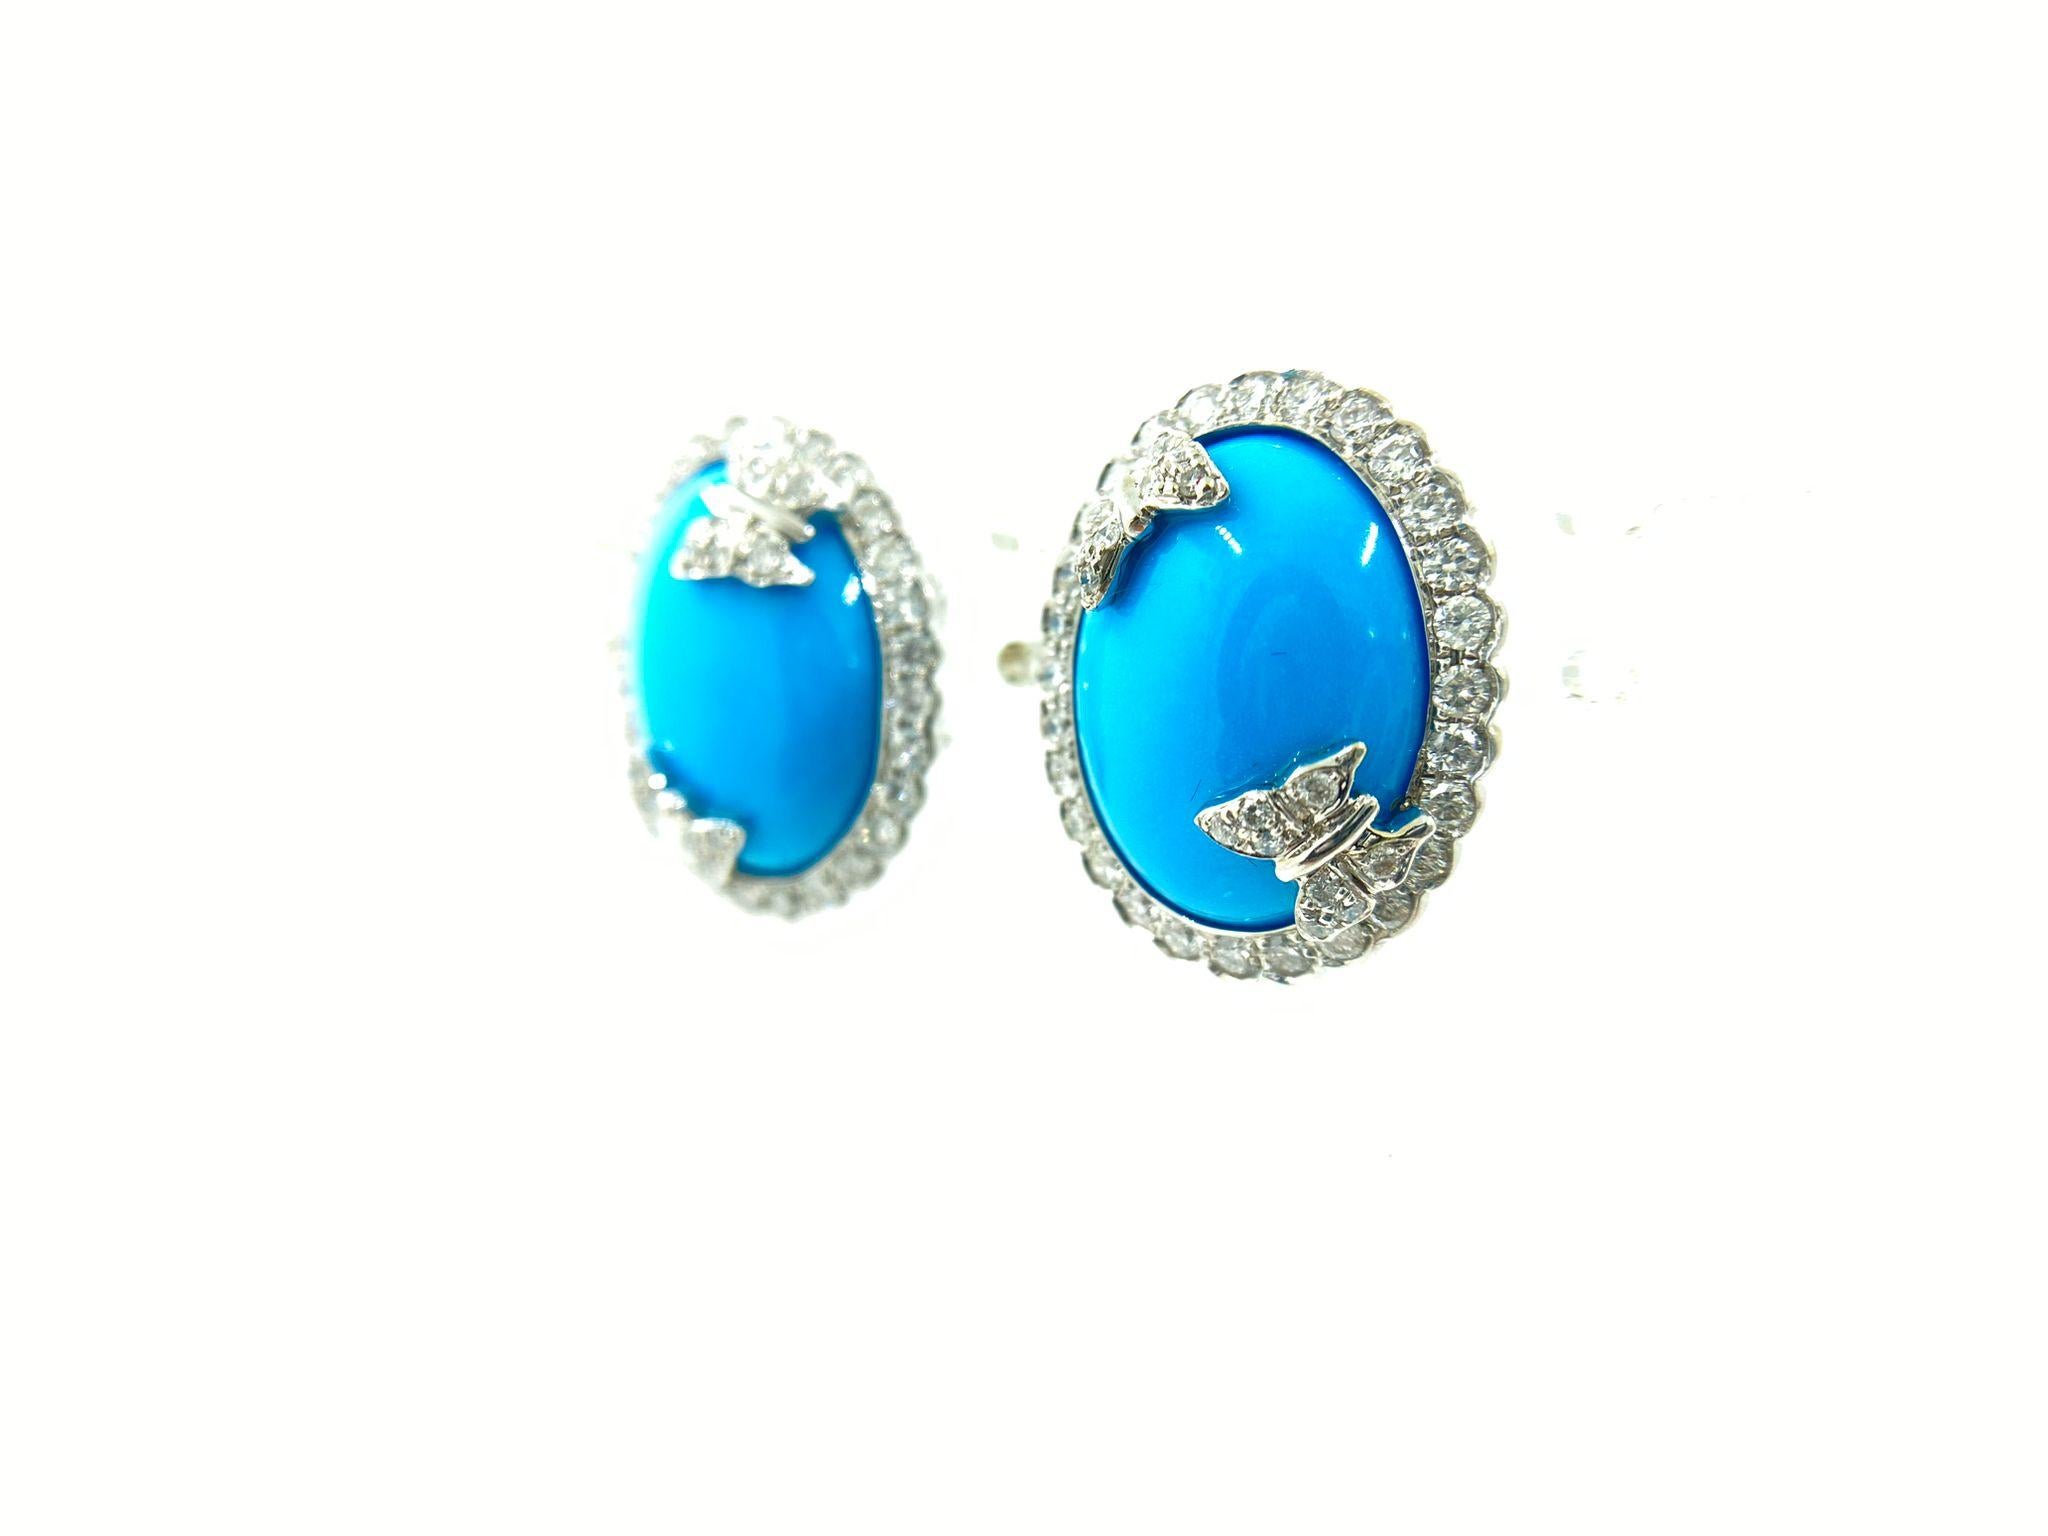 Dive into the serene hues of our exquisite turquoise earrings, showcasing a generous 15.20 carats of oval cabochon turquoise. Mined from the renowned Sleeping Beauty Mine, these gemstones are celebrated for their pure, light blue coloration, free